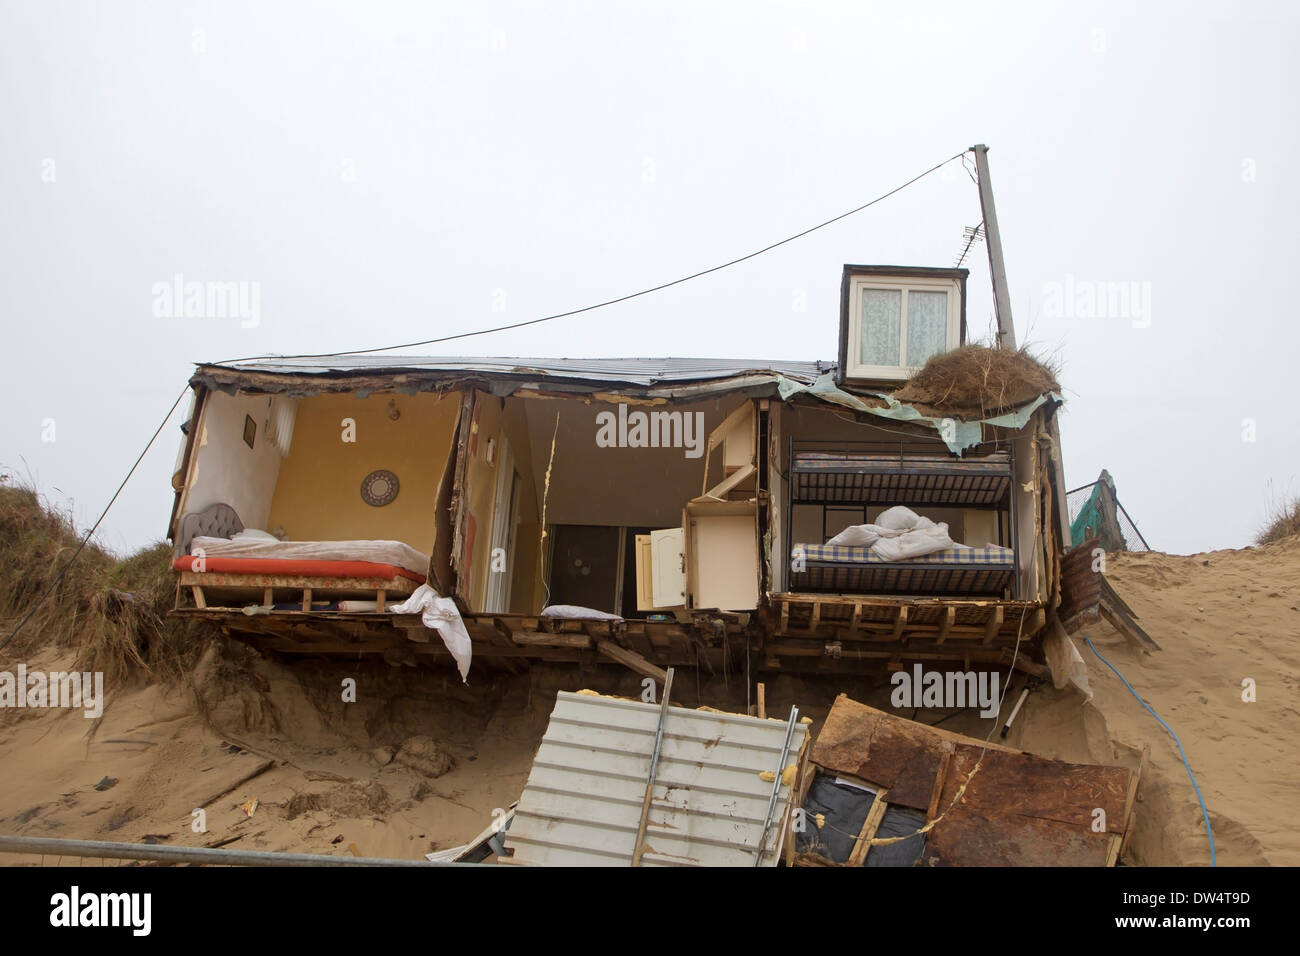 Eroded cliffs and damaged chalets following tidal surges of December 2013, Hemsby, Norfolk UK Stock Photo